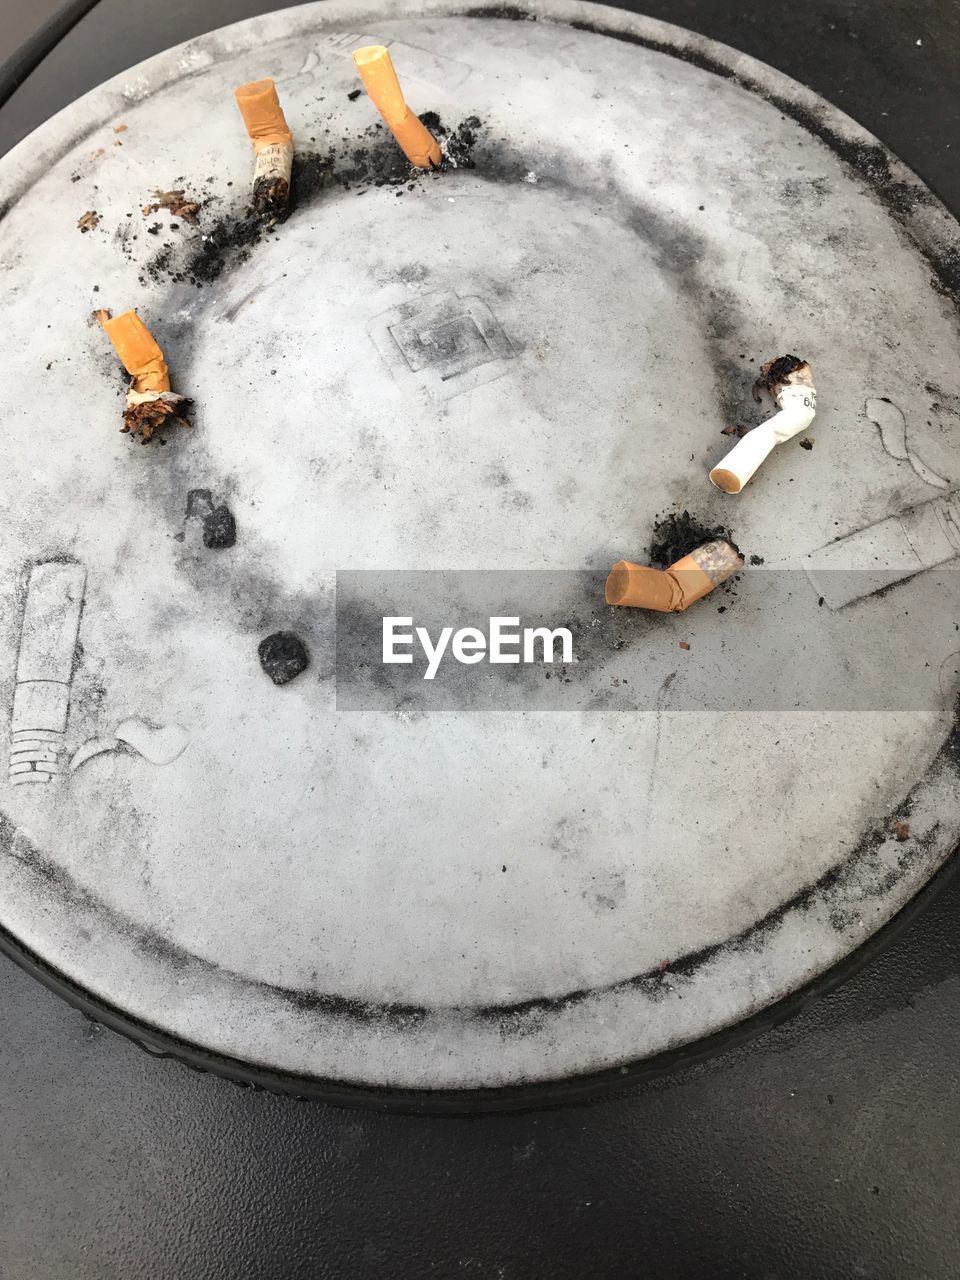 HIGH ANGLE VIEW OF CIGARETTE IN SNOW